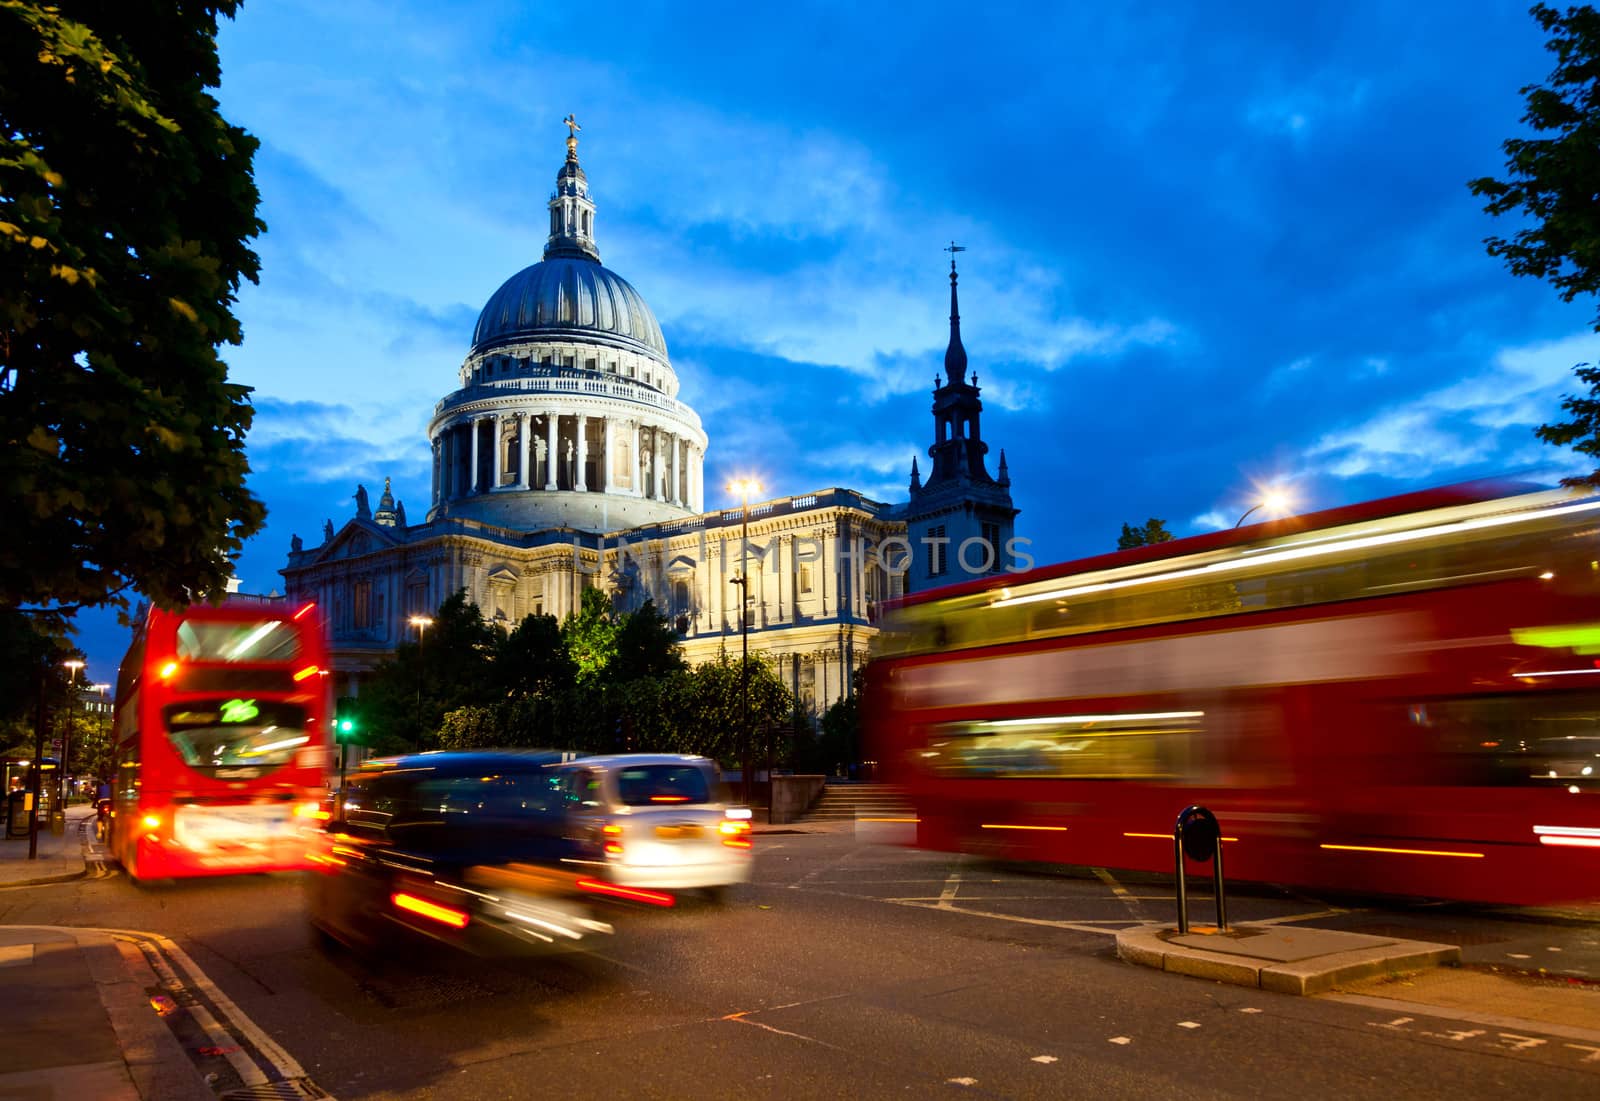 St Pauls Cathedral at dusk by naumoid